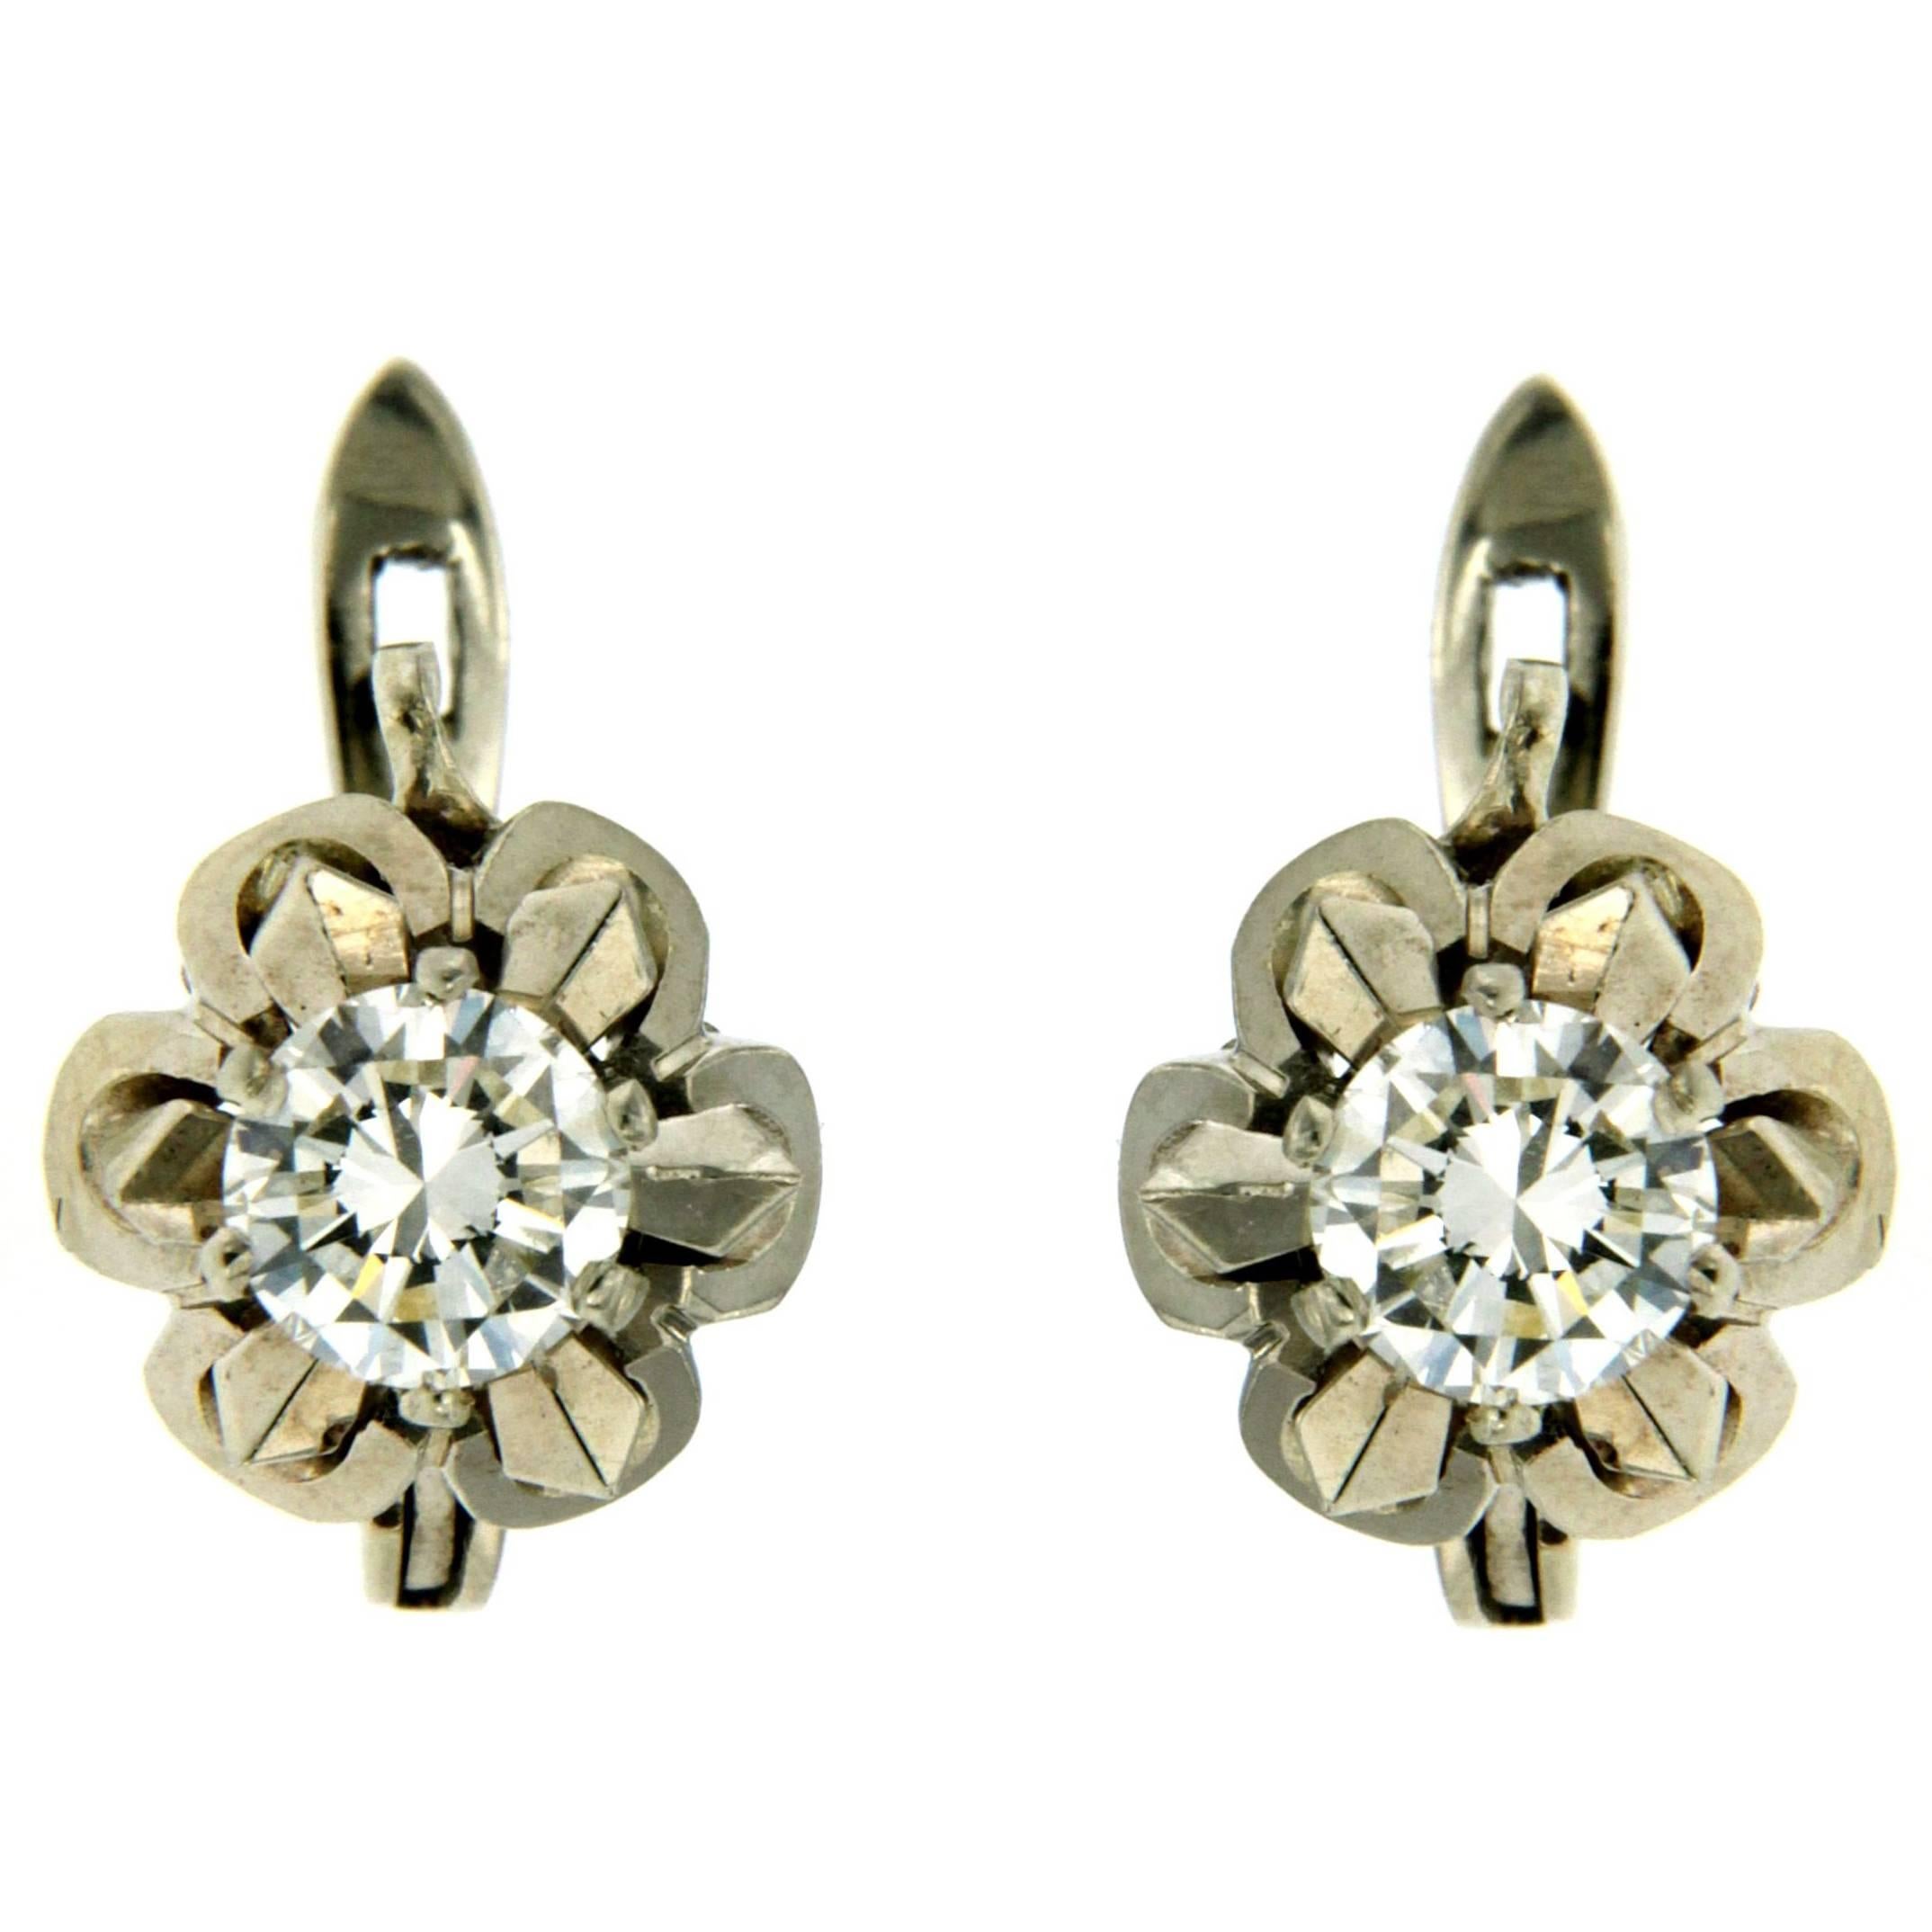 Timeless 1 carat Diamonds Gold Solitaire Stud Earrings